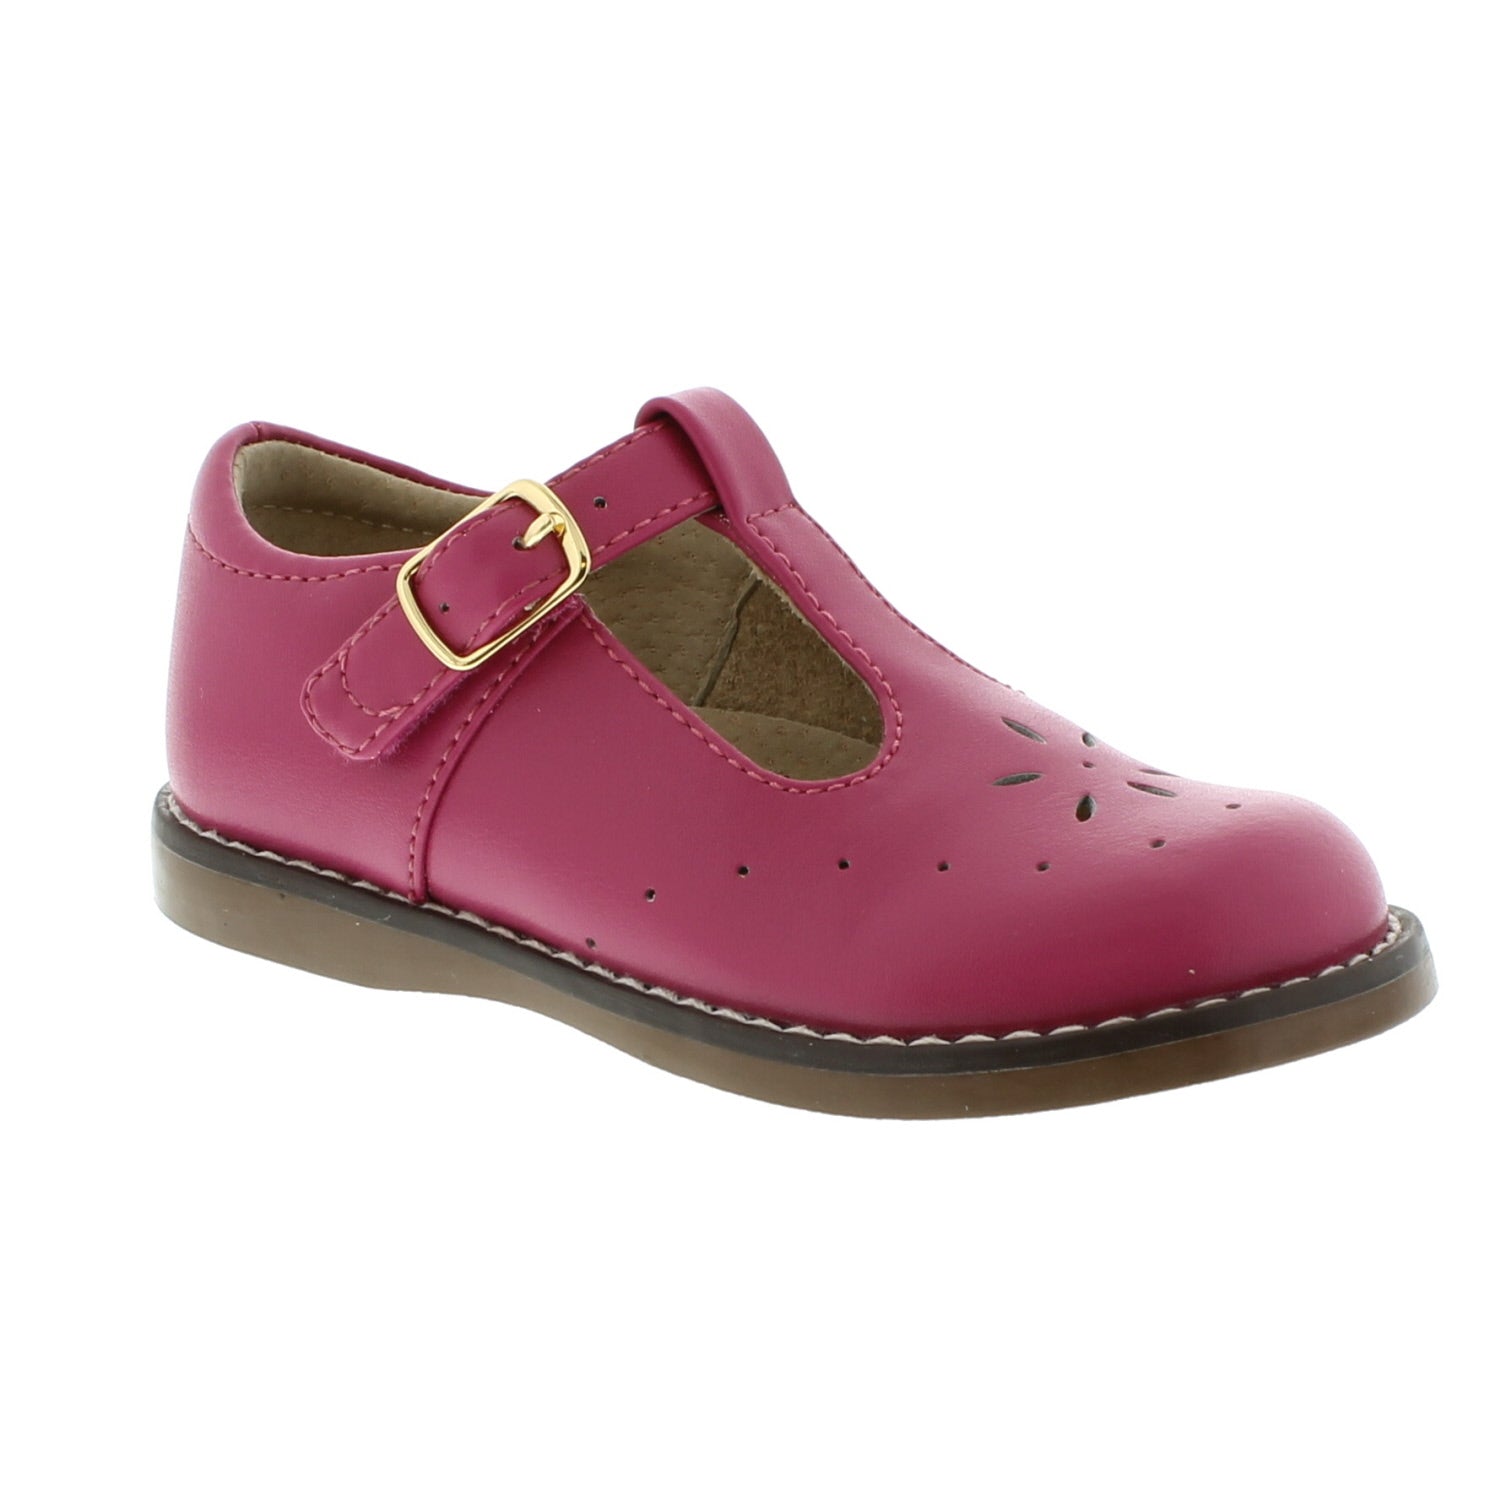 Footmates Hot Pink Mary Jane Dallas Childrens Shoe Store